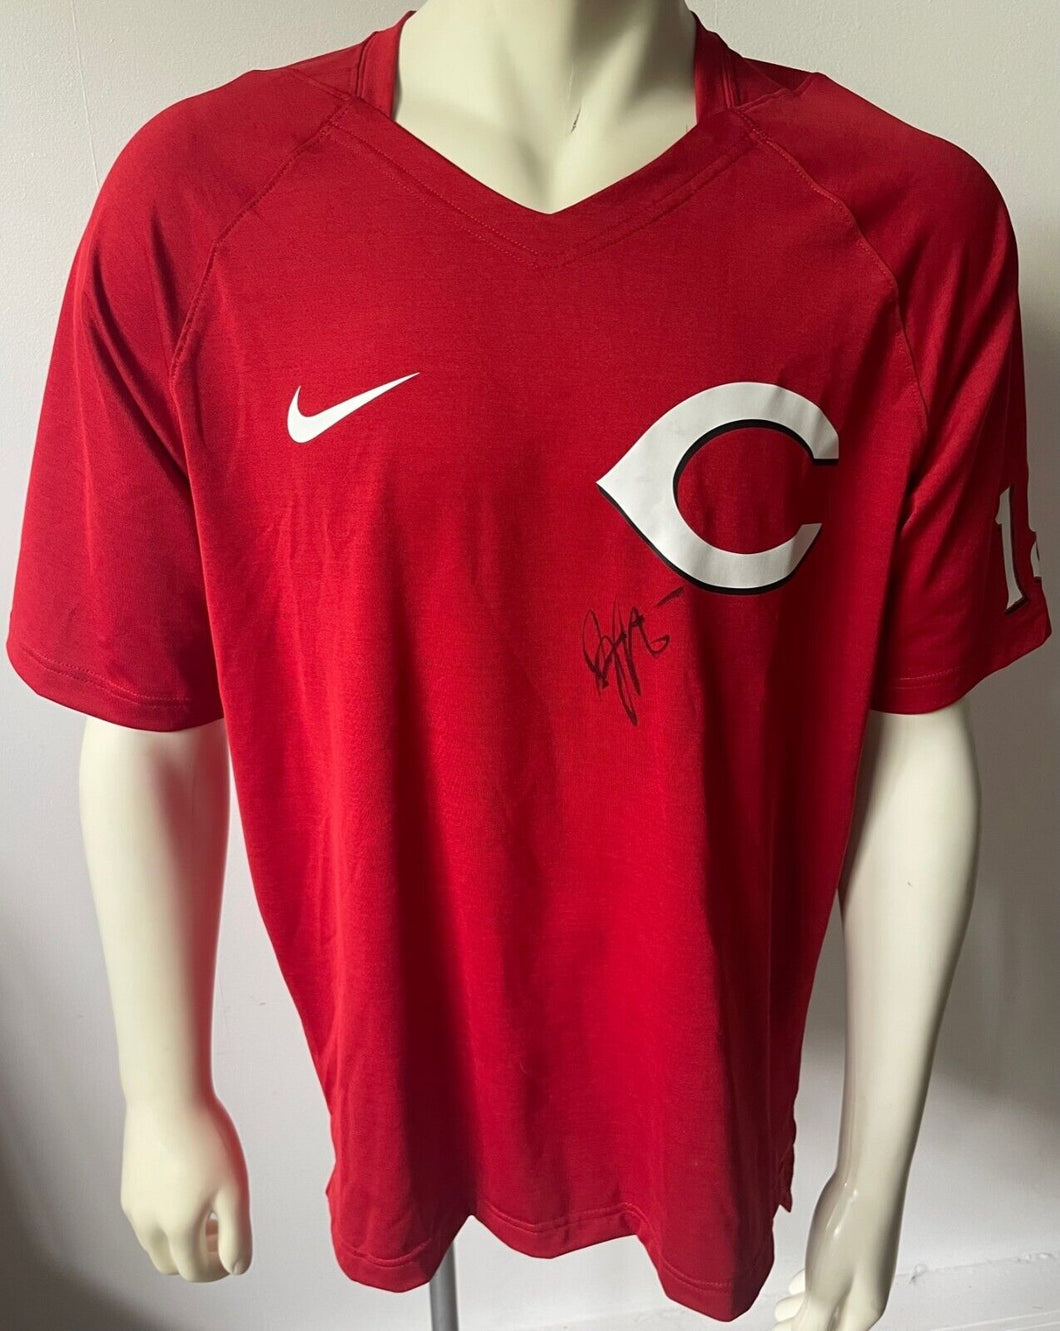 Joey Votto Signed Cincinnati Reds Autographed Game Used Batting Shirt –  Glory Days Sports